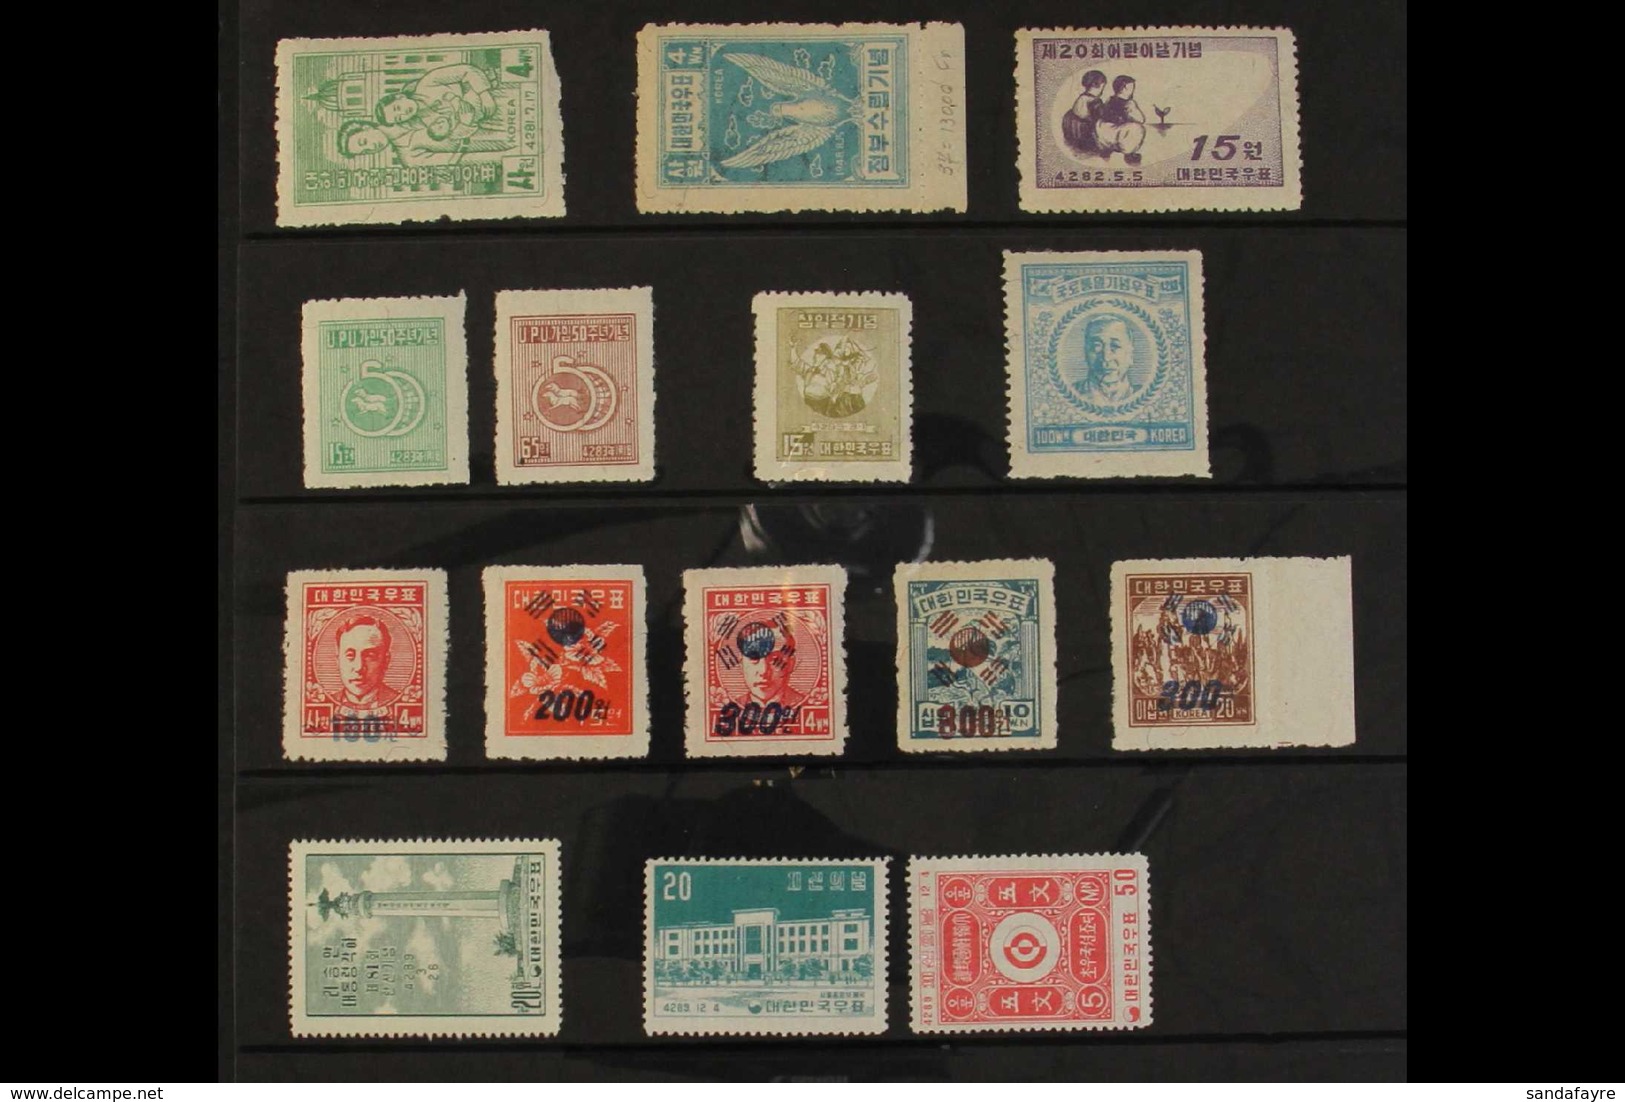 1948-56 MINT / UNUSED GROUP Includes 1948 4w Green Constitution, 4w Light Blue Republic, 1949 Children's Day, 1950 UPU S - Korea, South